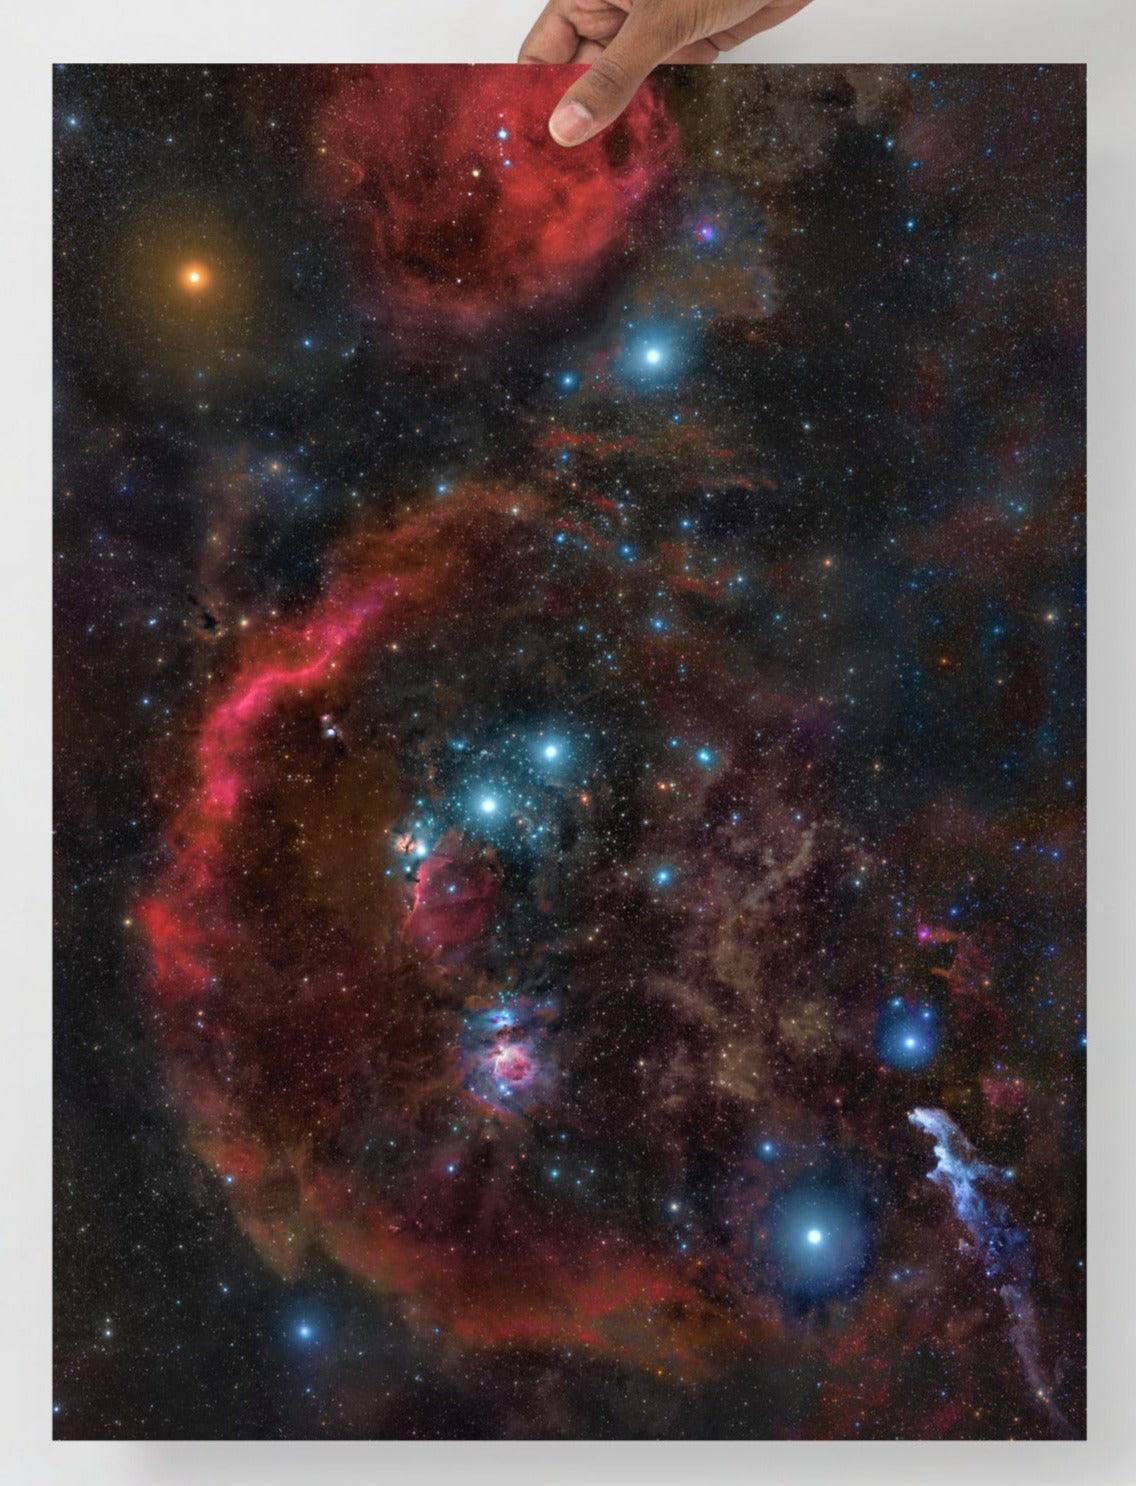 An Orion Constellation  poster on a plain backdrop in size 18x24”.